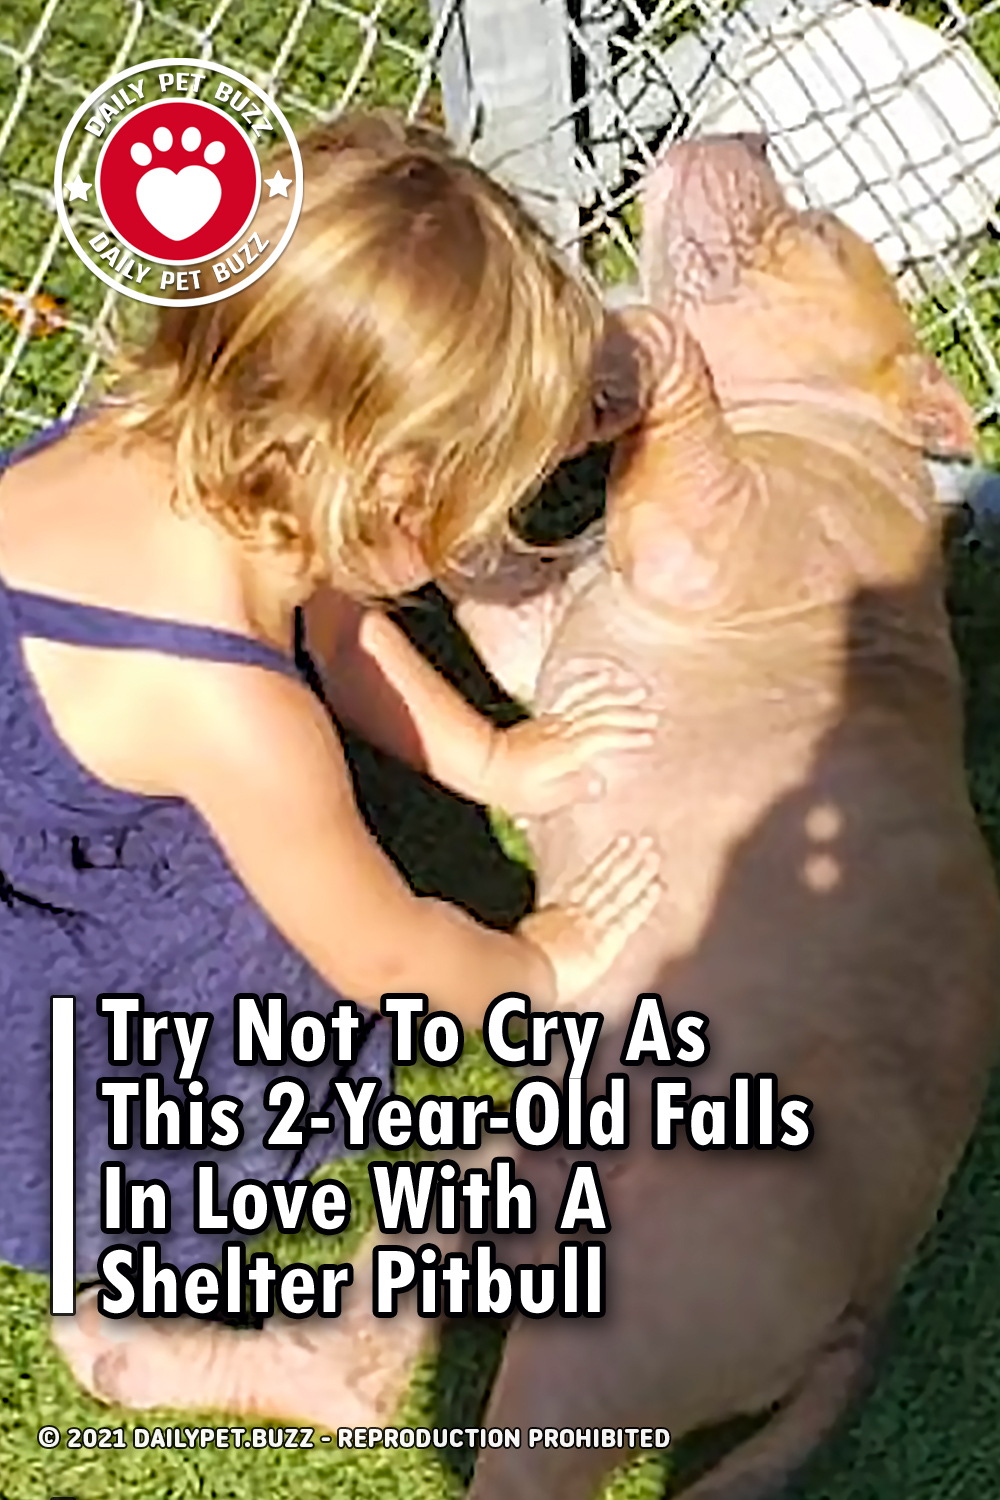 Try Not To Cry As This 2-Year-Old Falls In Love With A Shelter Pitbull